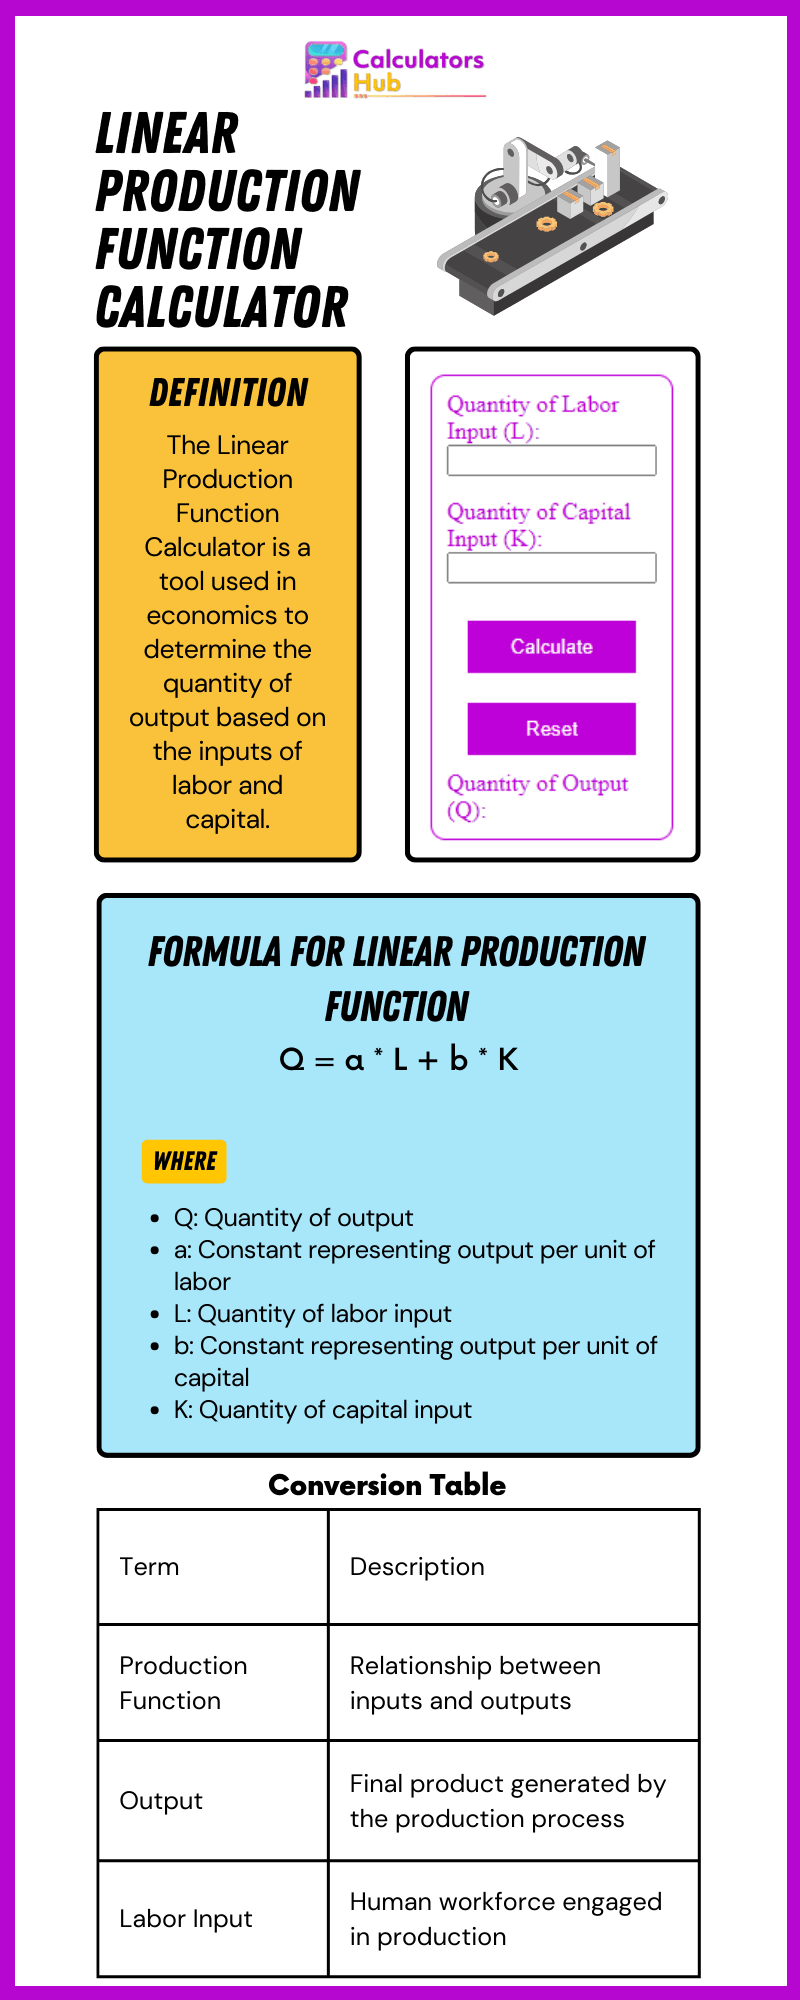 Linear Production Function Calculator